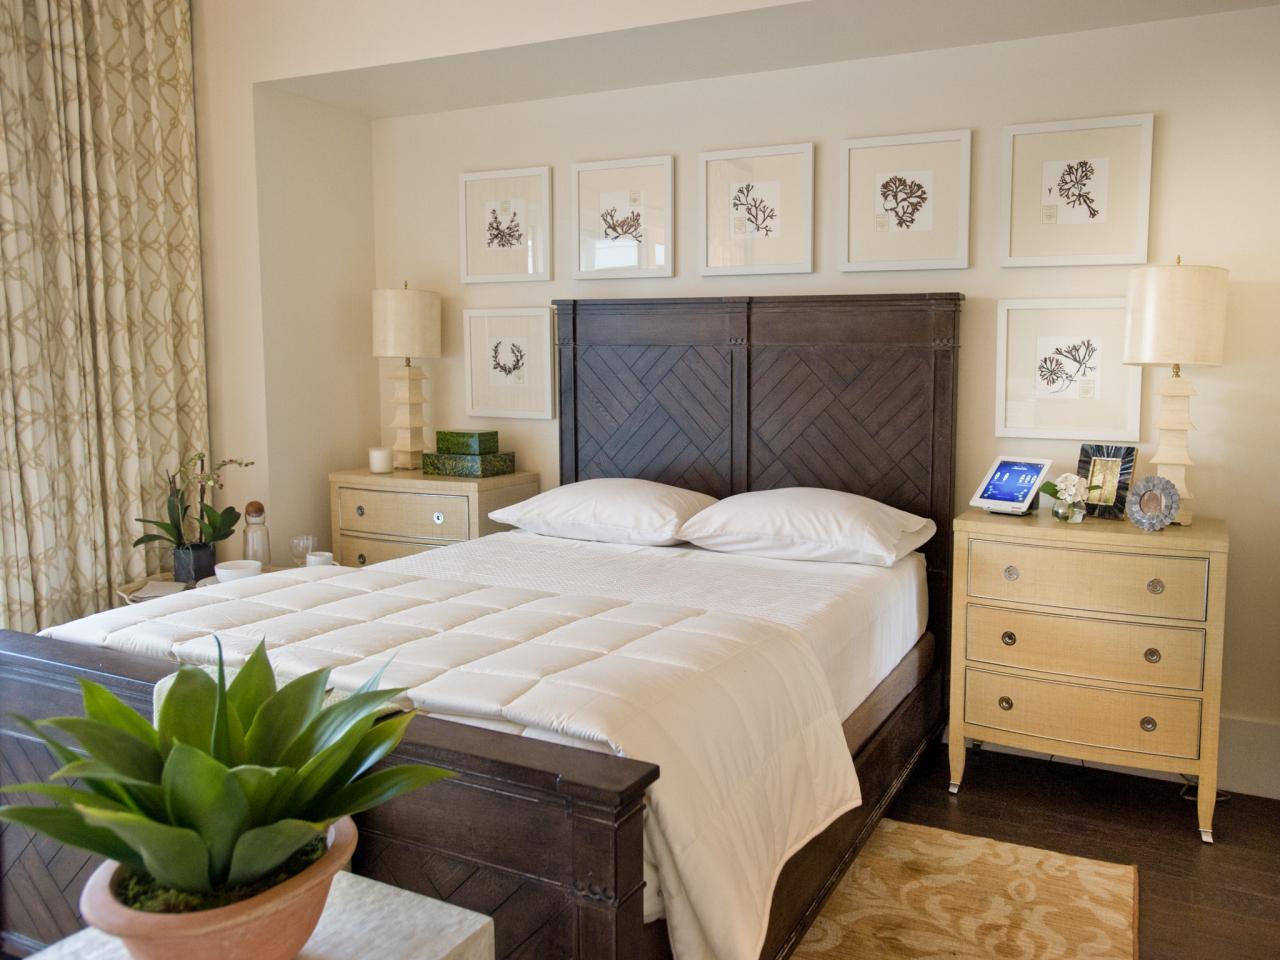 Master Bedroom Color Combinations: Pictures, Options ...